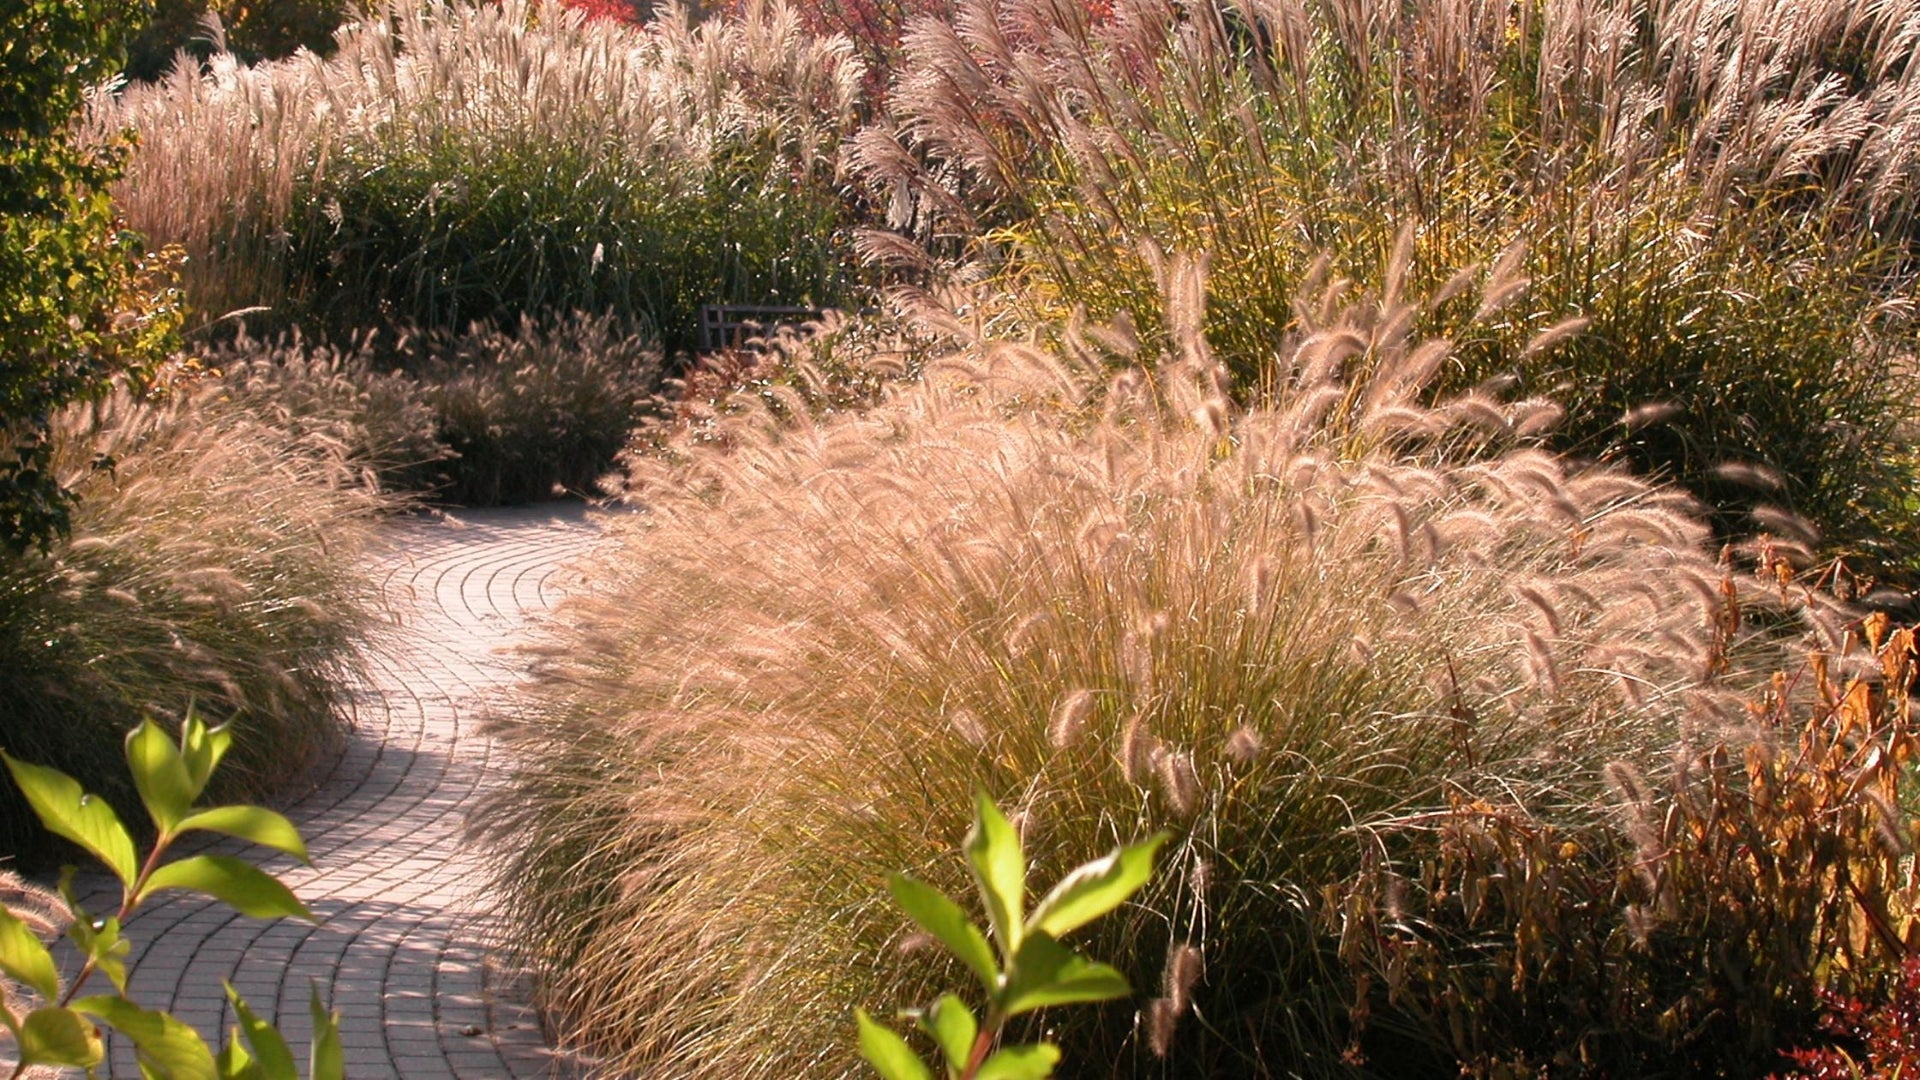 Sunny pathway filled with ornamental grasses